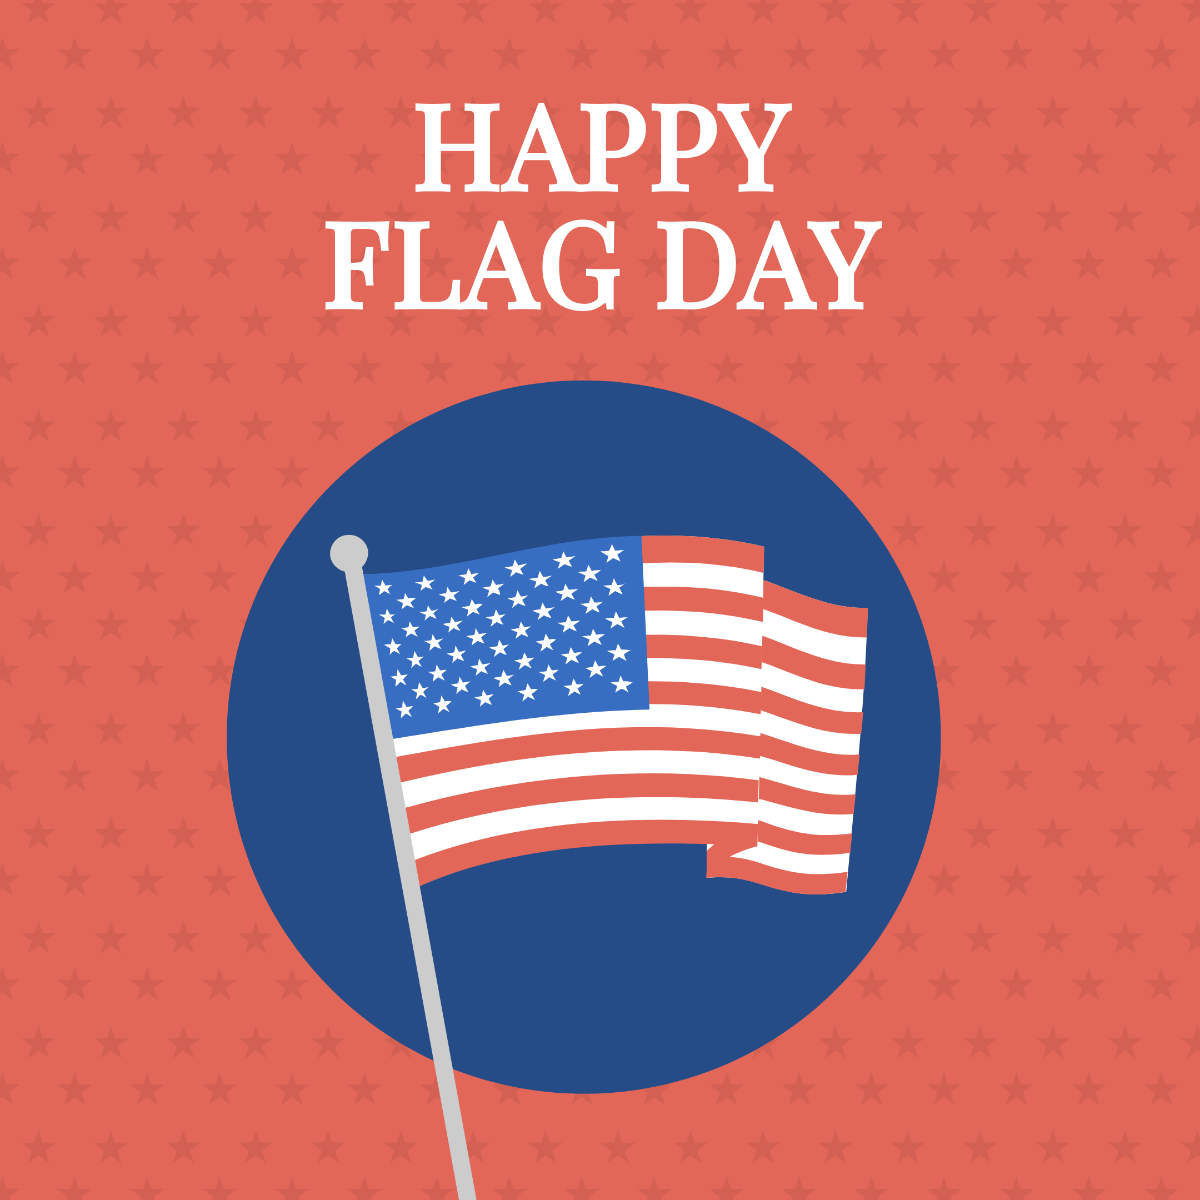 Free Happy Flag Day Image Template